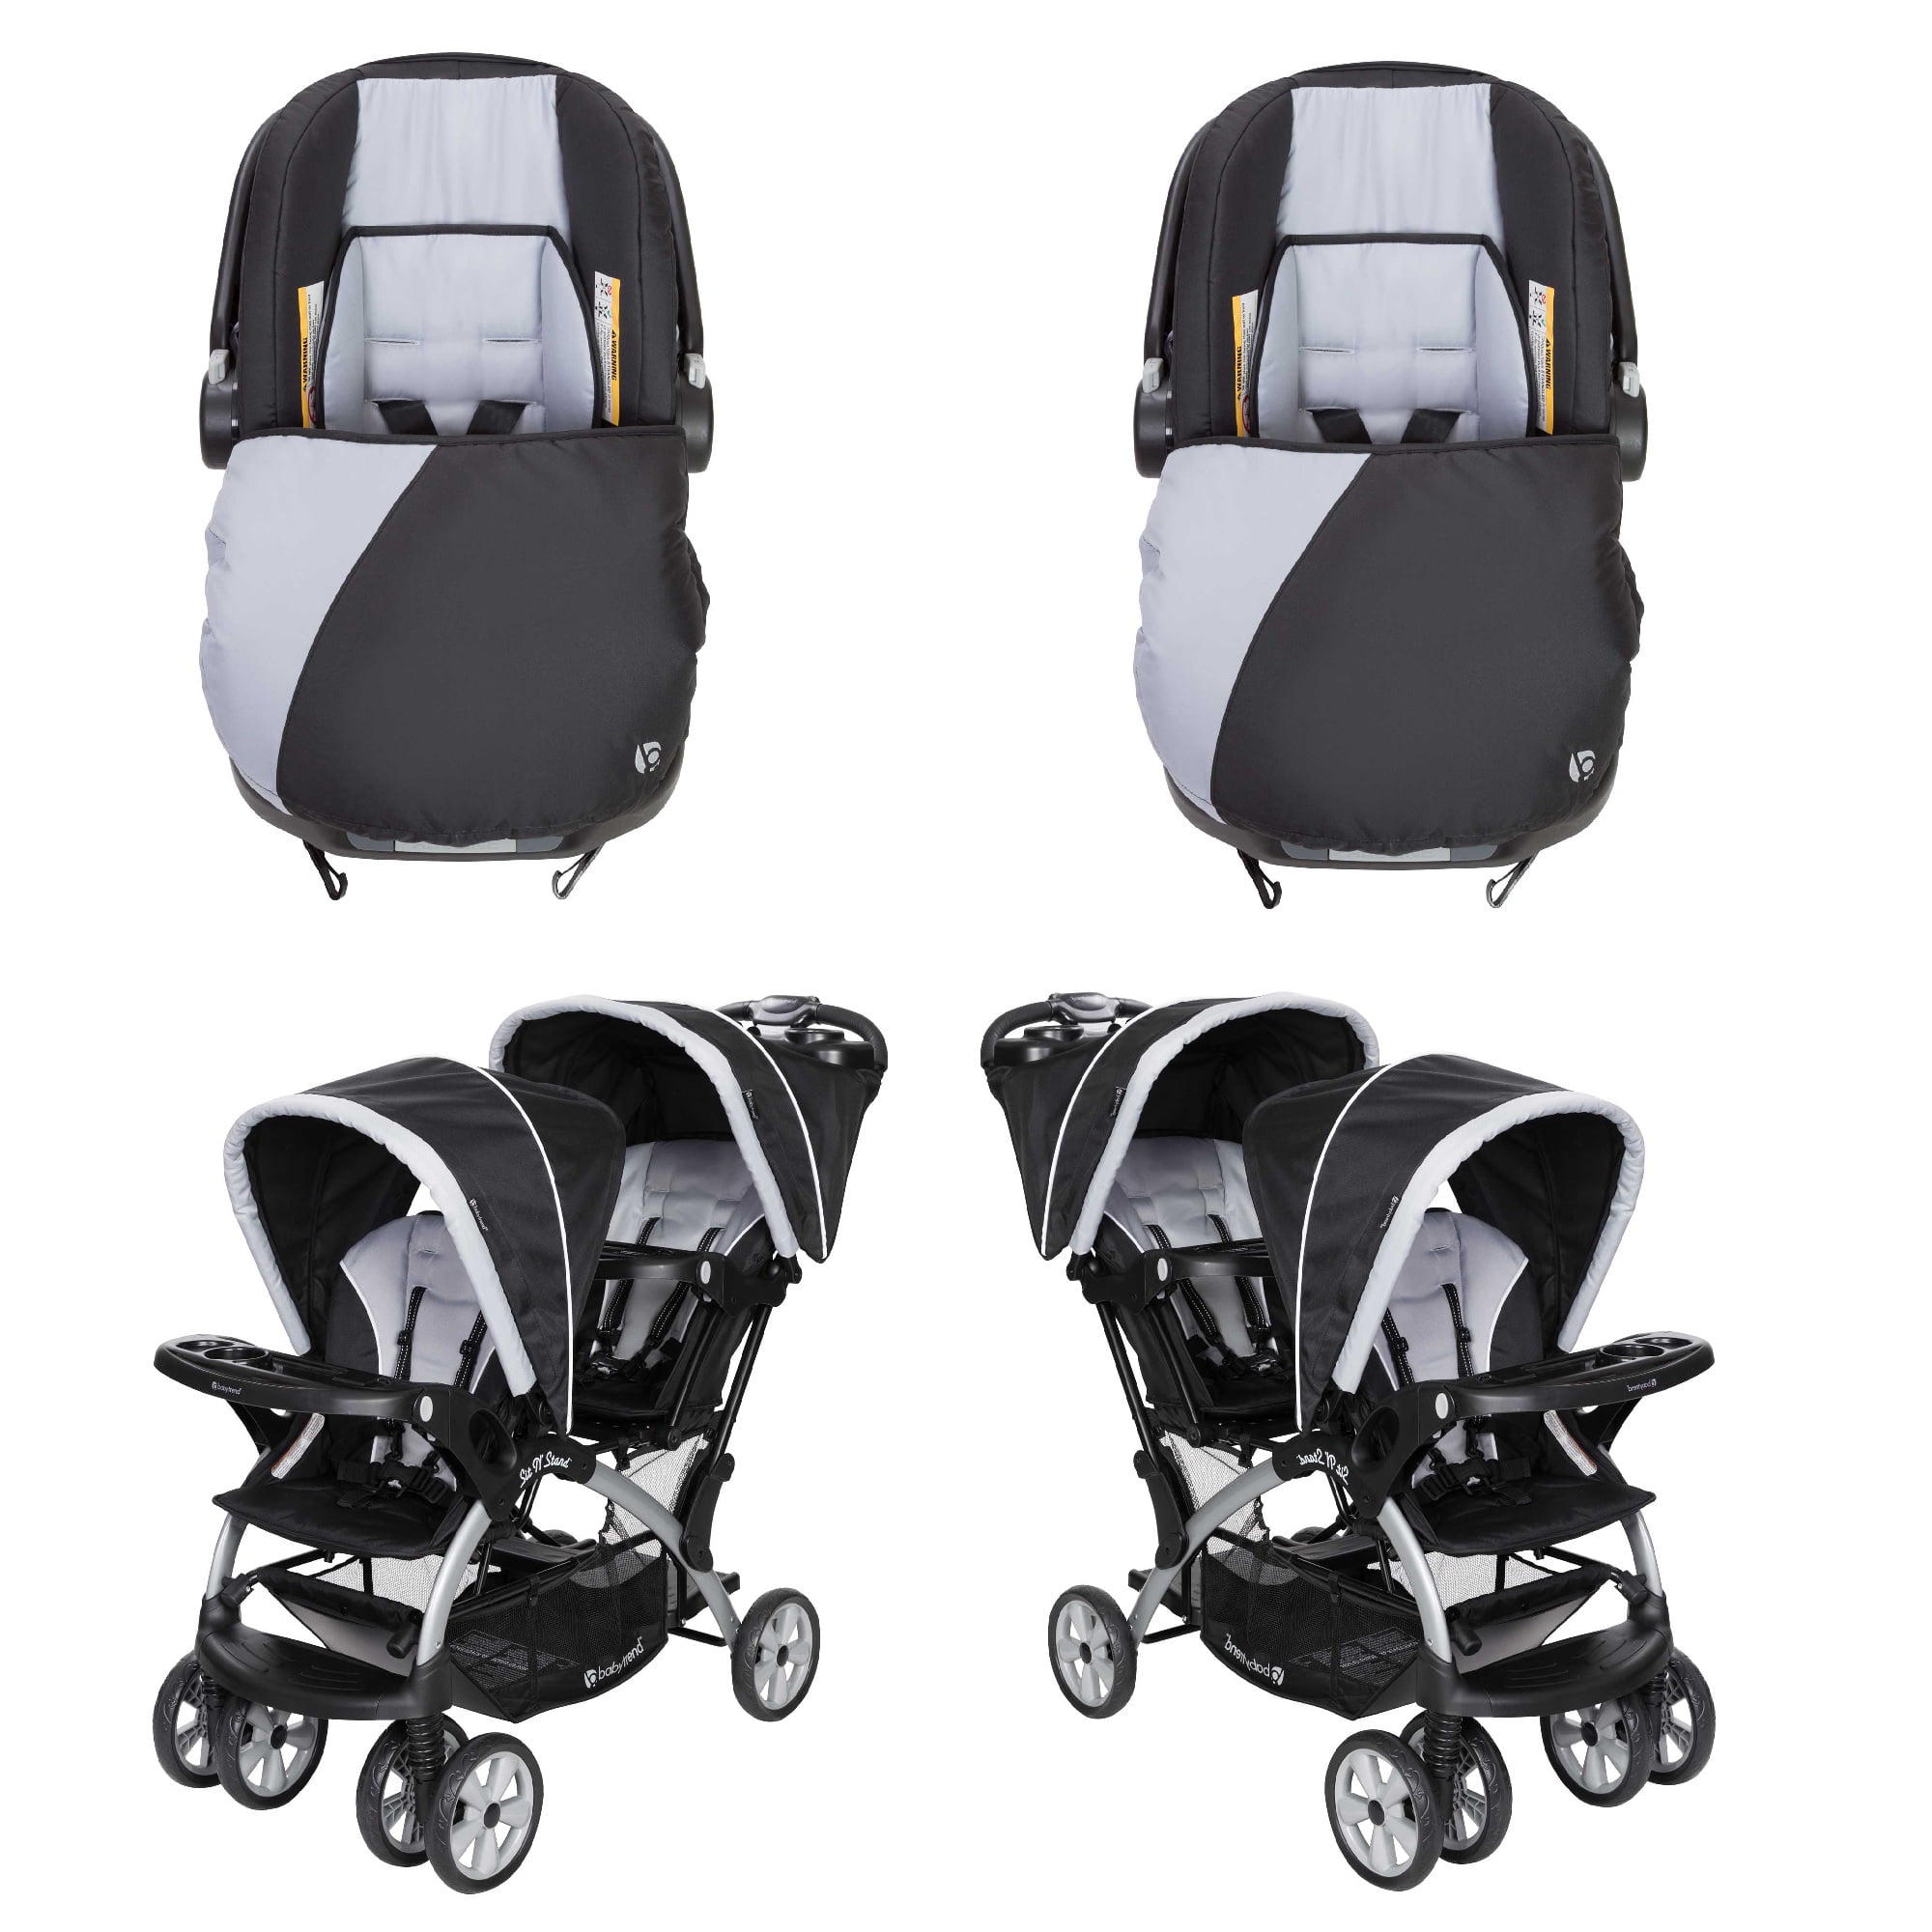 2 seater stroller with car seats